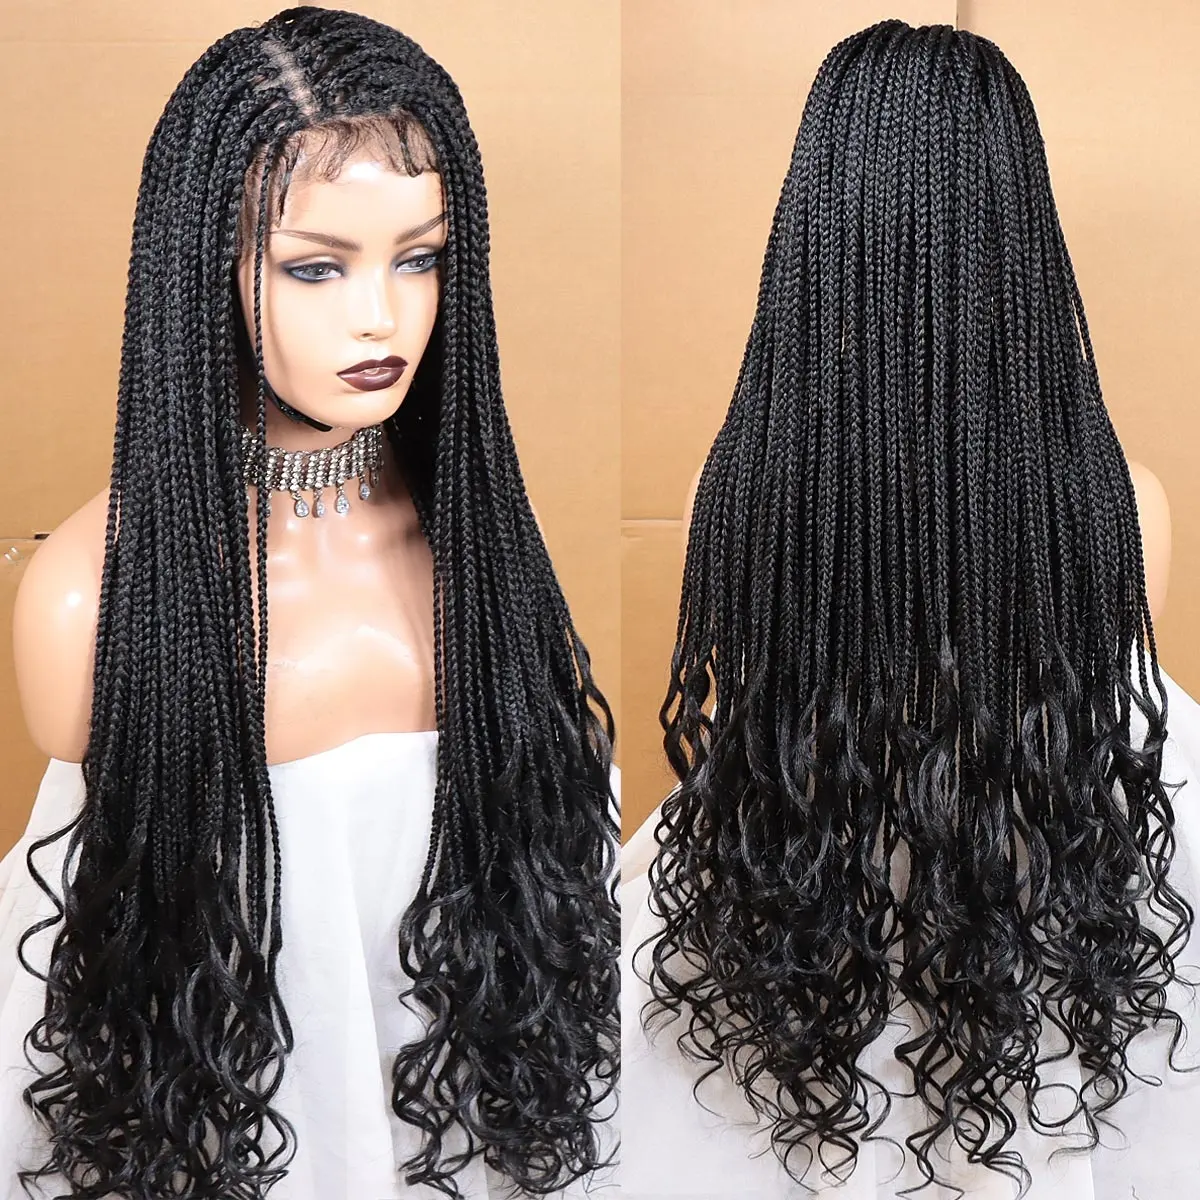 New Long Black Synthetic Hair Lace Front Braided Wigs Handmade Box Braids Crochet Hair with Curly End Braided Lace Frontal Wig